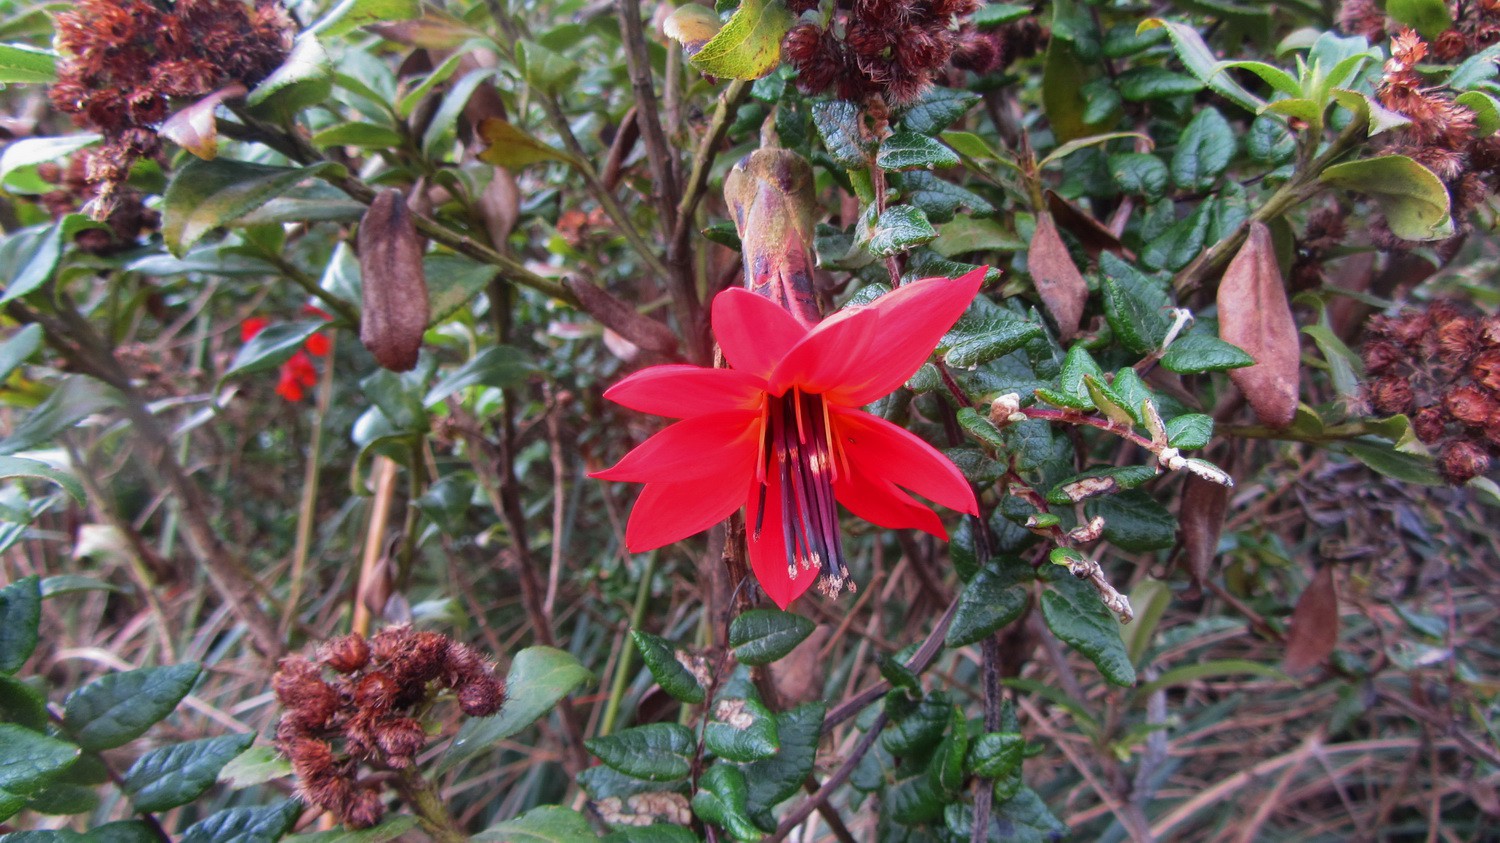 Another red flower